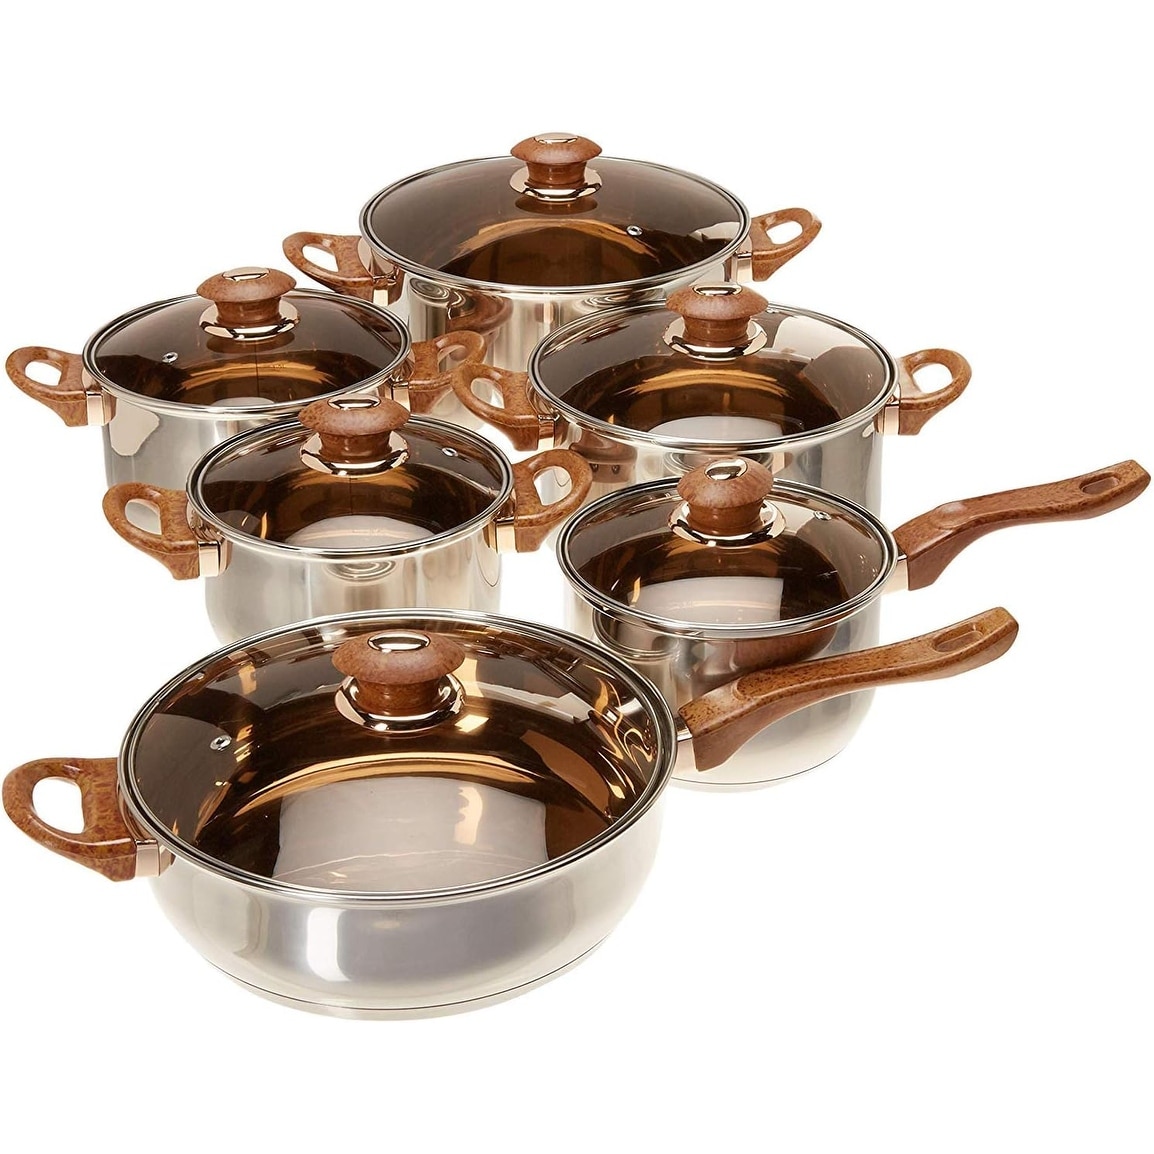 12-Piece Stainless Steel Cookware Set - Bed Bath & Beyond - 39193161